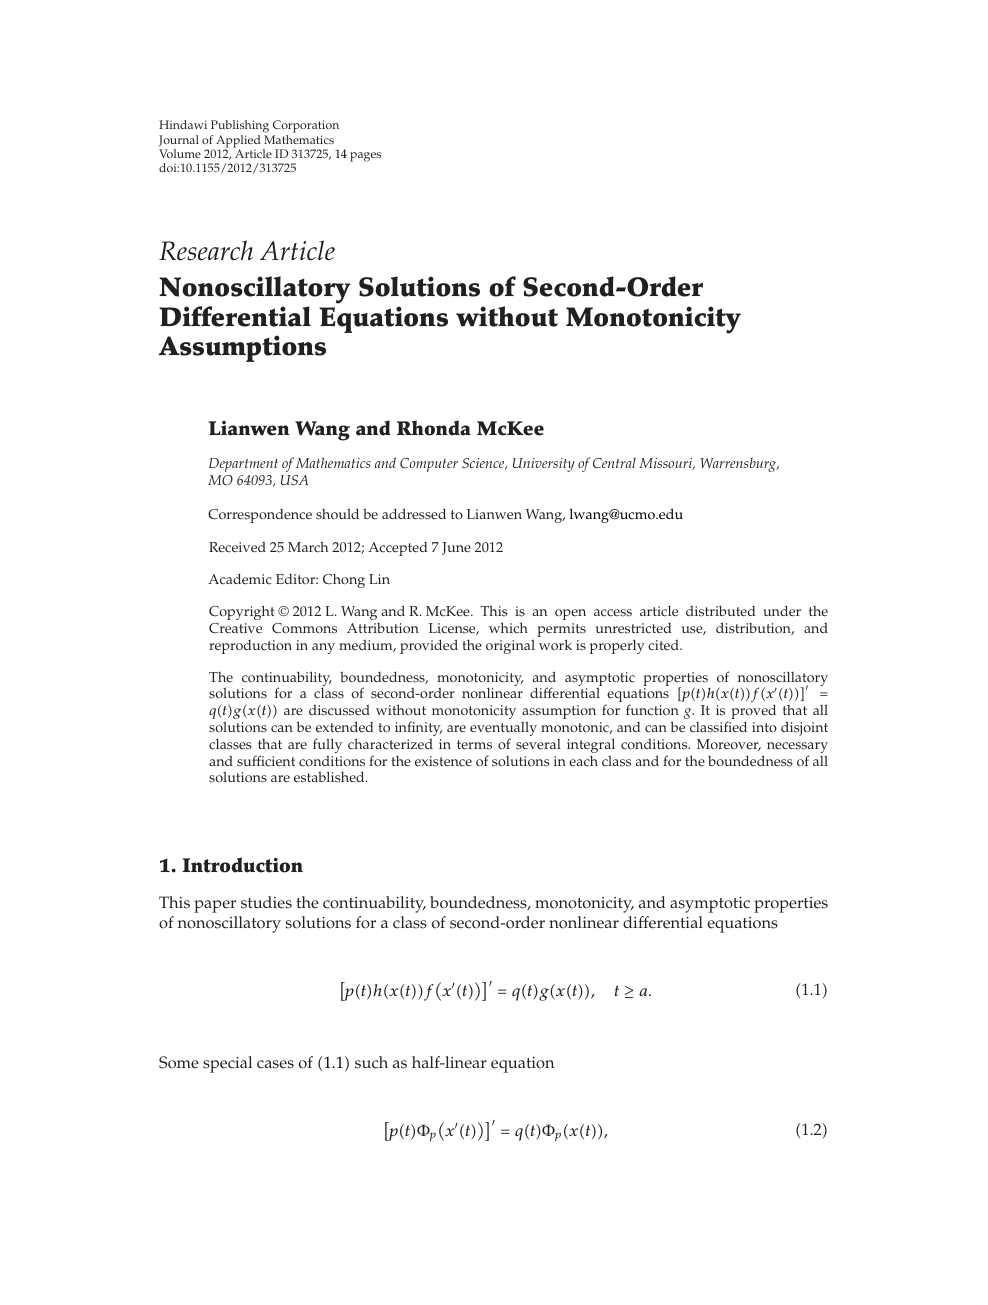 Nonoscillatory Solutions Of Second Order Differential Equations Without Monotonicity Assumptions Topic Of Research Paper In Mathematics Download Scholarly Article Pdf And Read For Free On Cyberleninka Open Science Hub